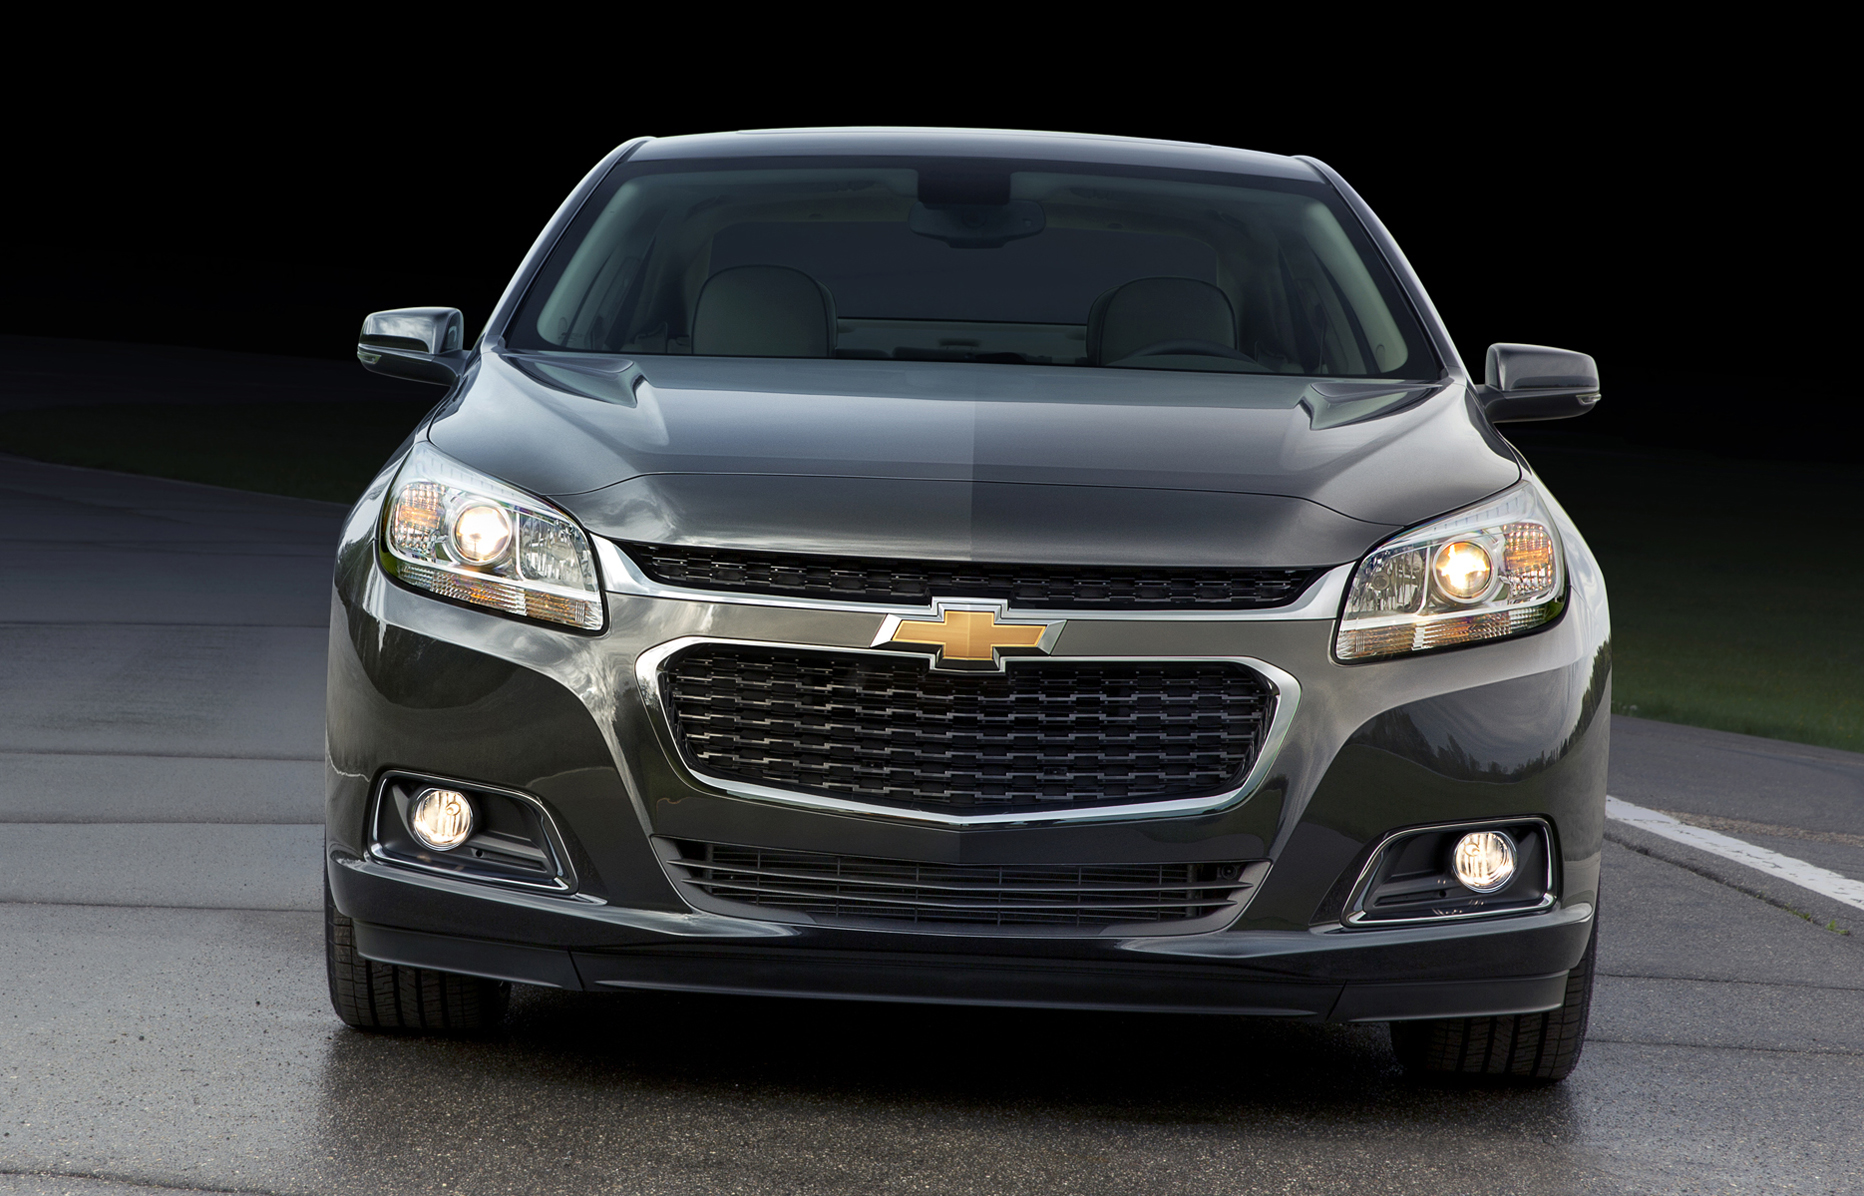 The 2014 Malibu’s front fascia features a new, more prominent lower grille and the hood extends down and over the leading edge of a narrower upper grille. The grille openings are wider and accented with chrome.